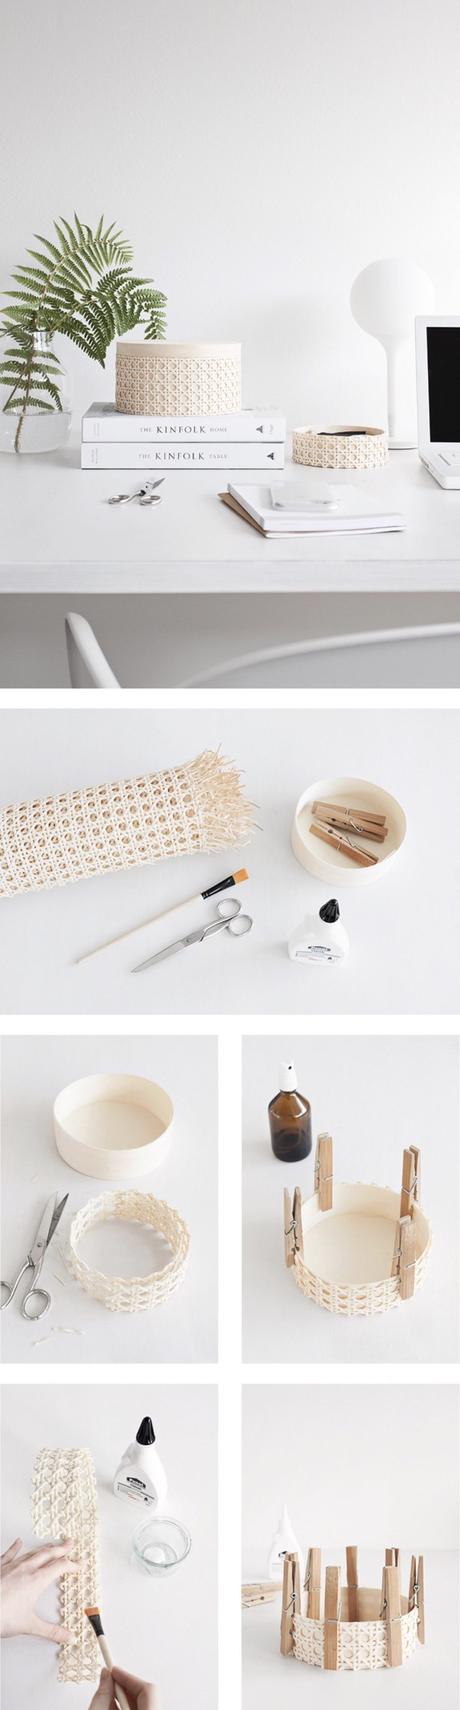 cannage diy création recyclage - blog déco - clem around the corner